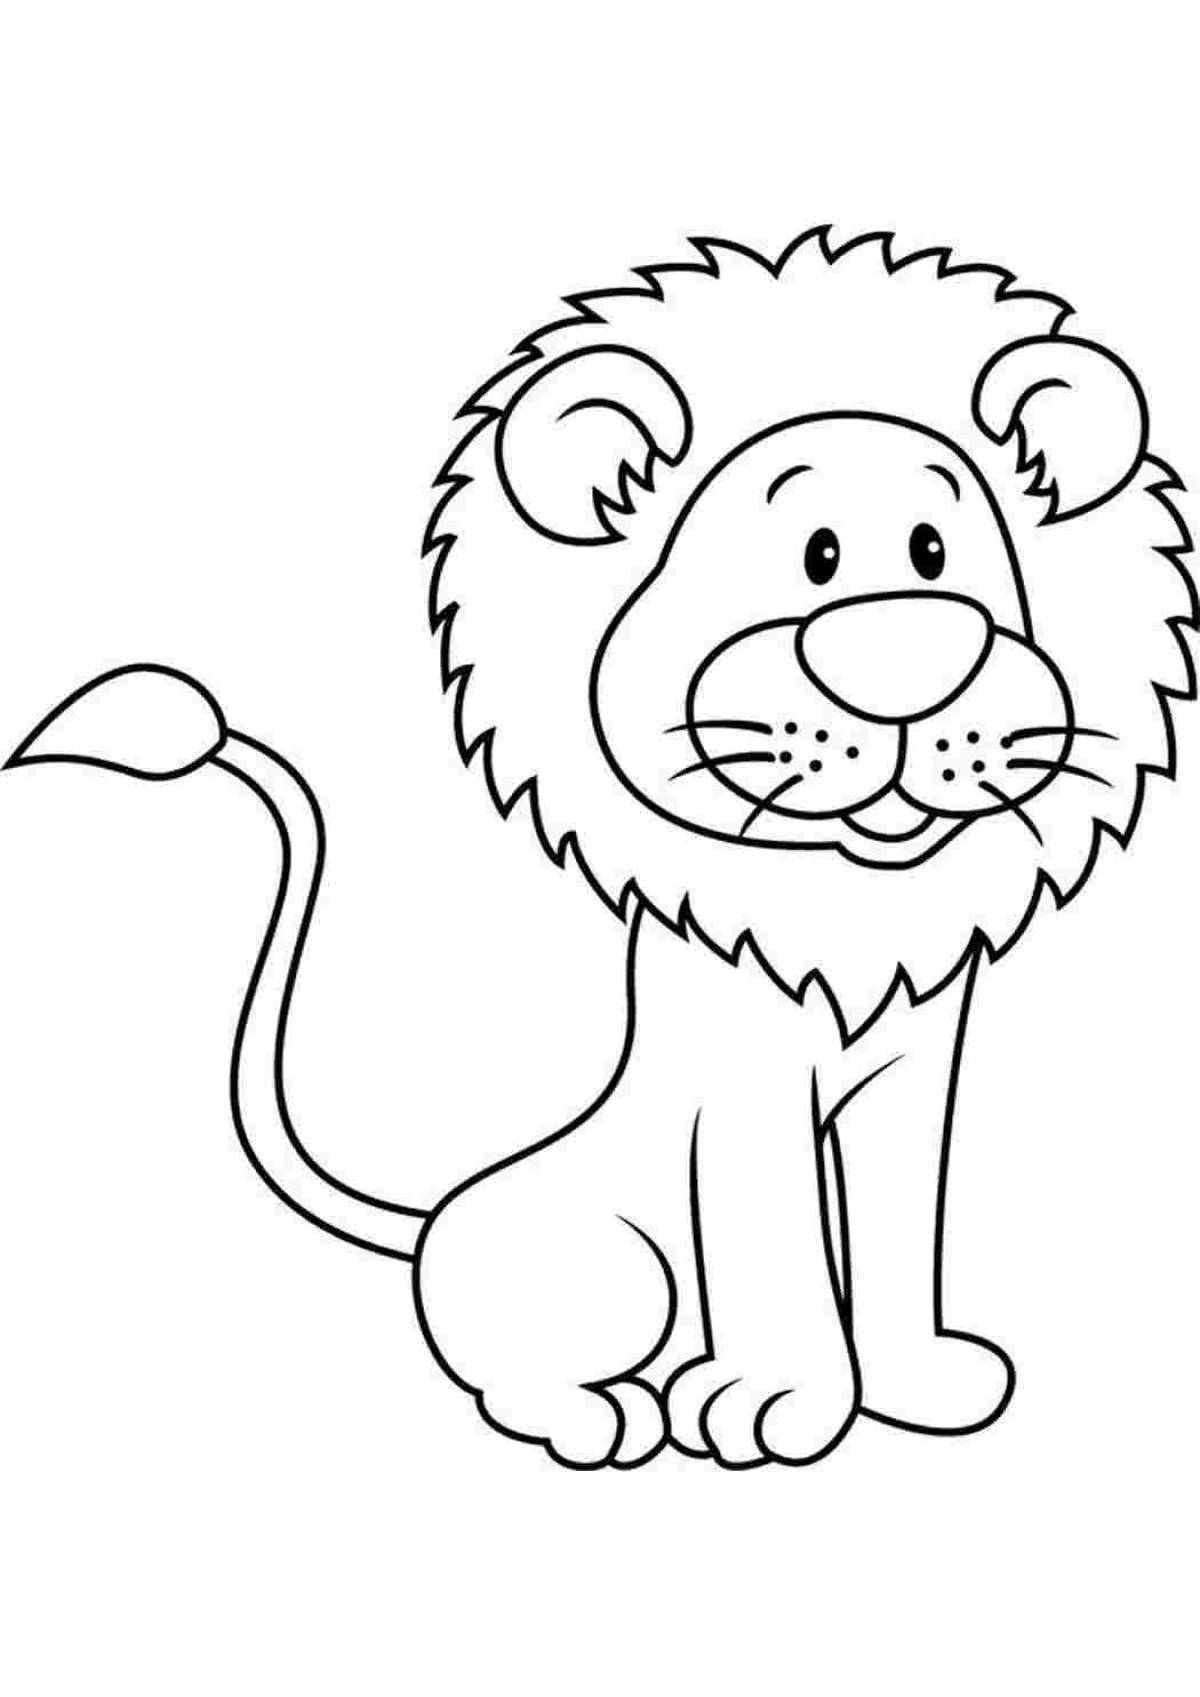 Coloring book happy lion for children 3-4 years old